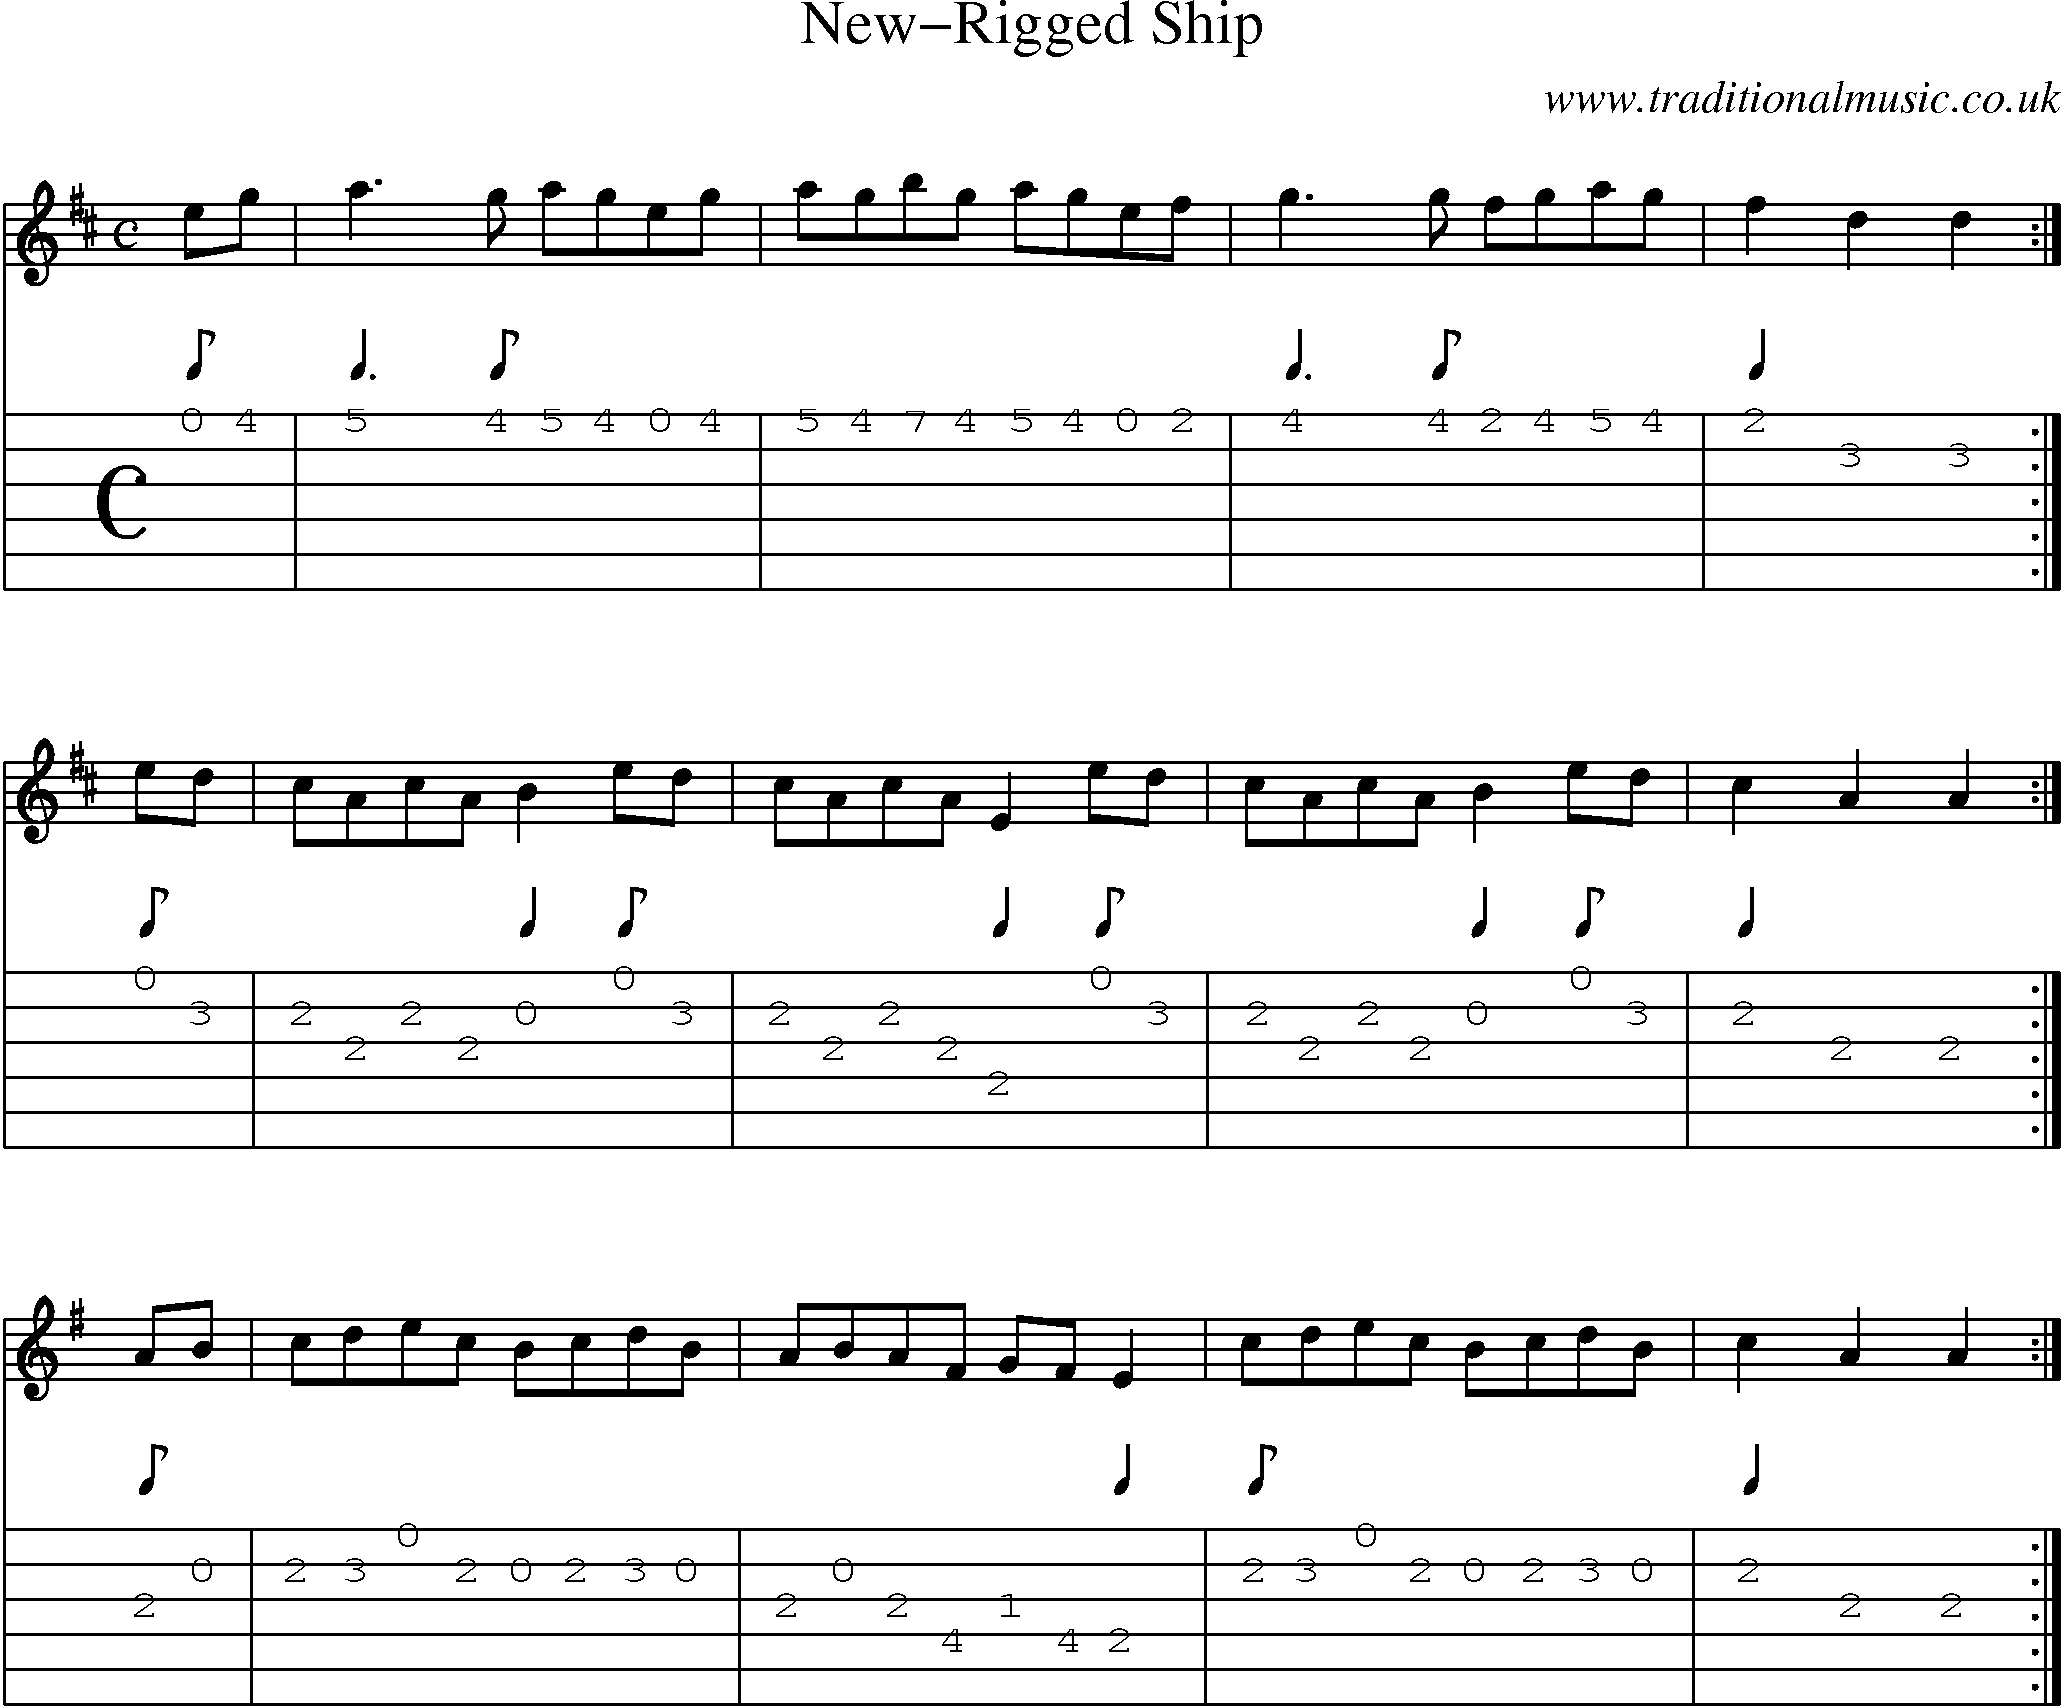 Music Score and Guitar Tabs for Newrigged Ship